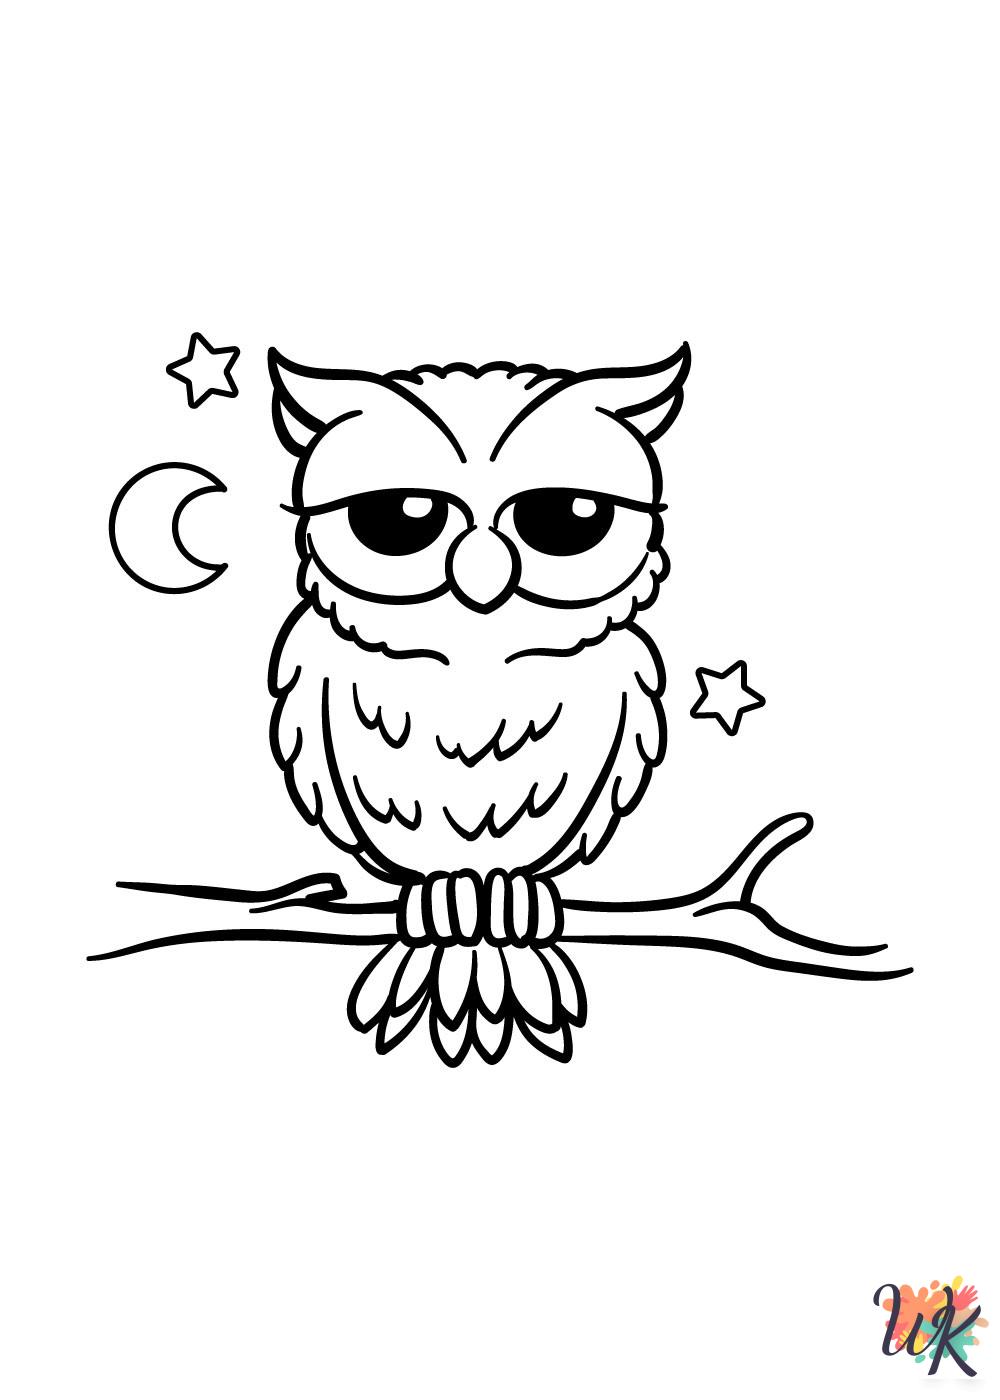 Owl coloring pages for adults easy